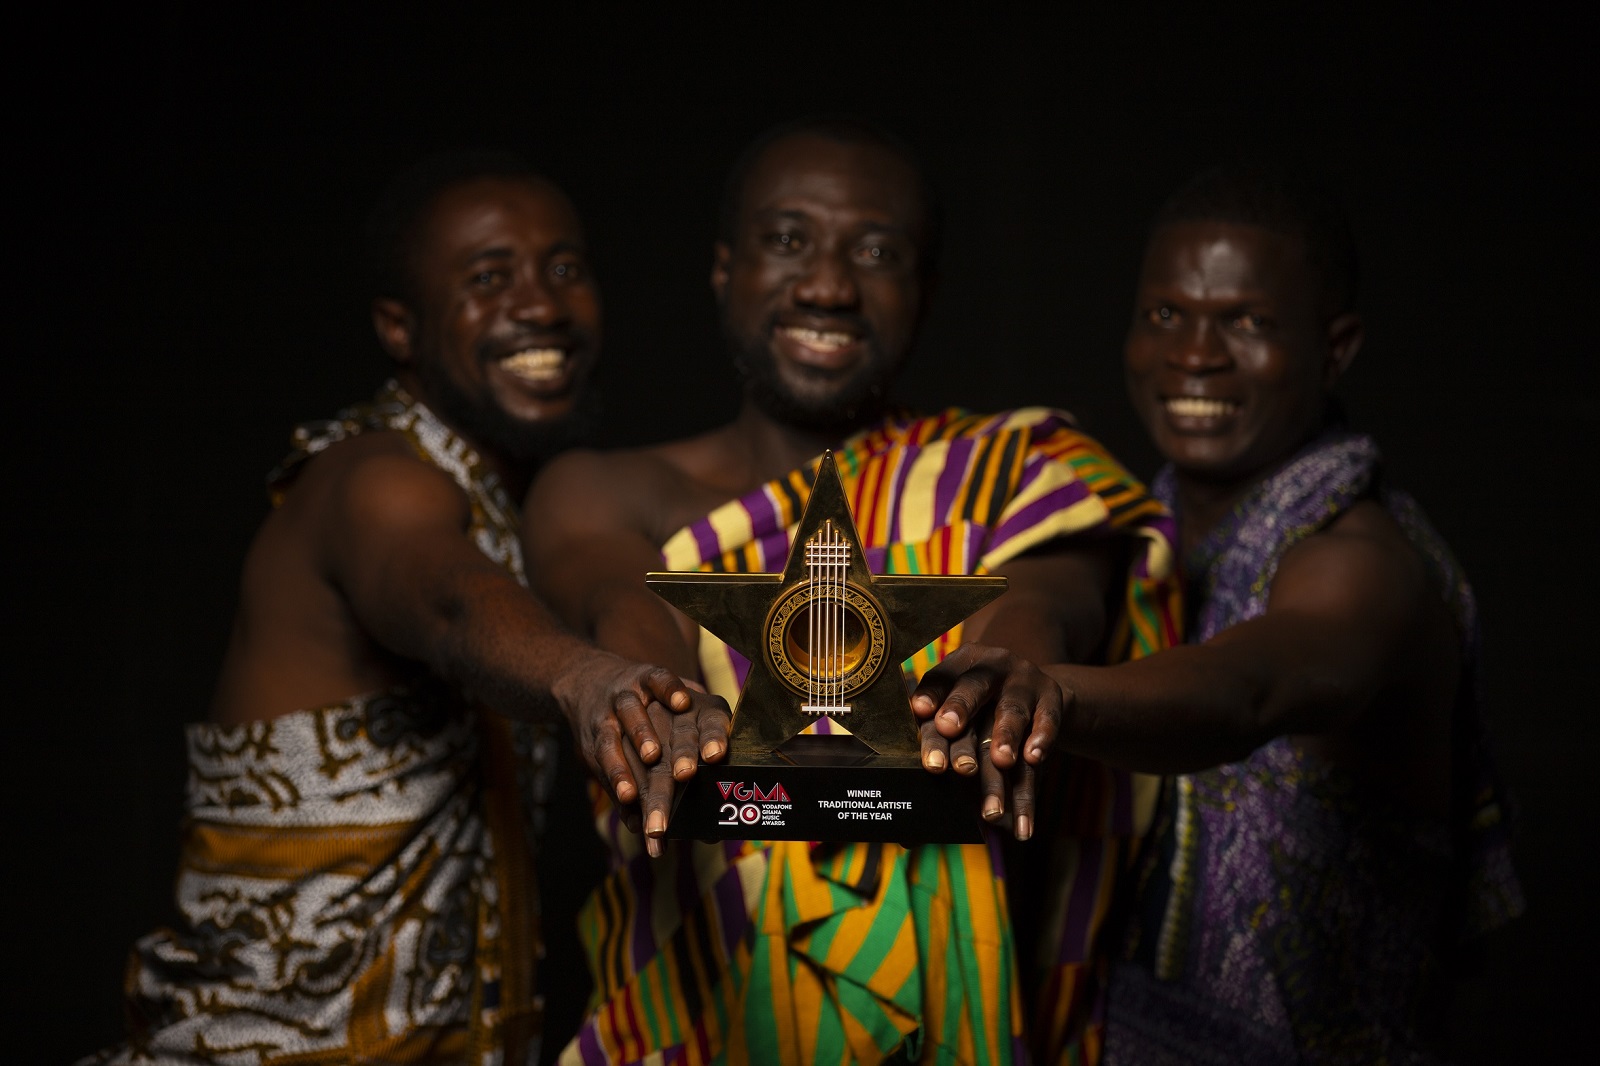 Kwan Pa Traditional Artiste of The Year - VGMA 20